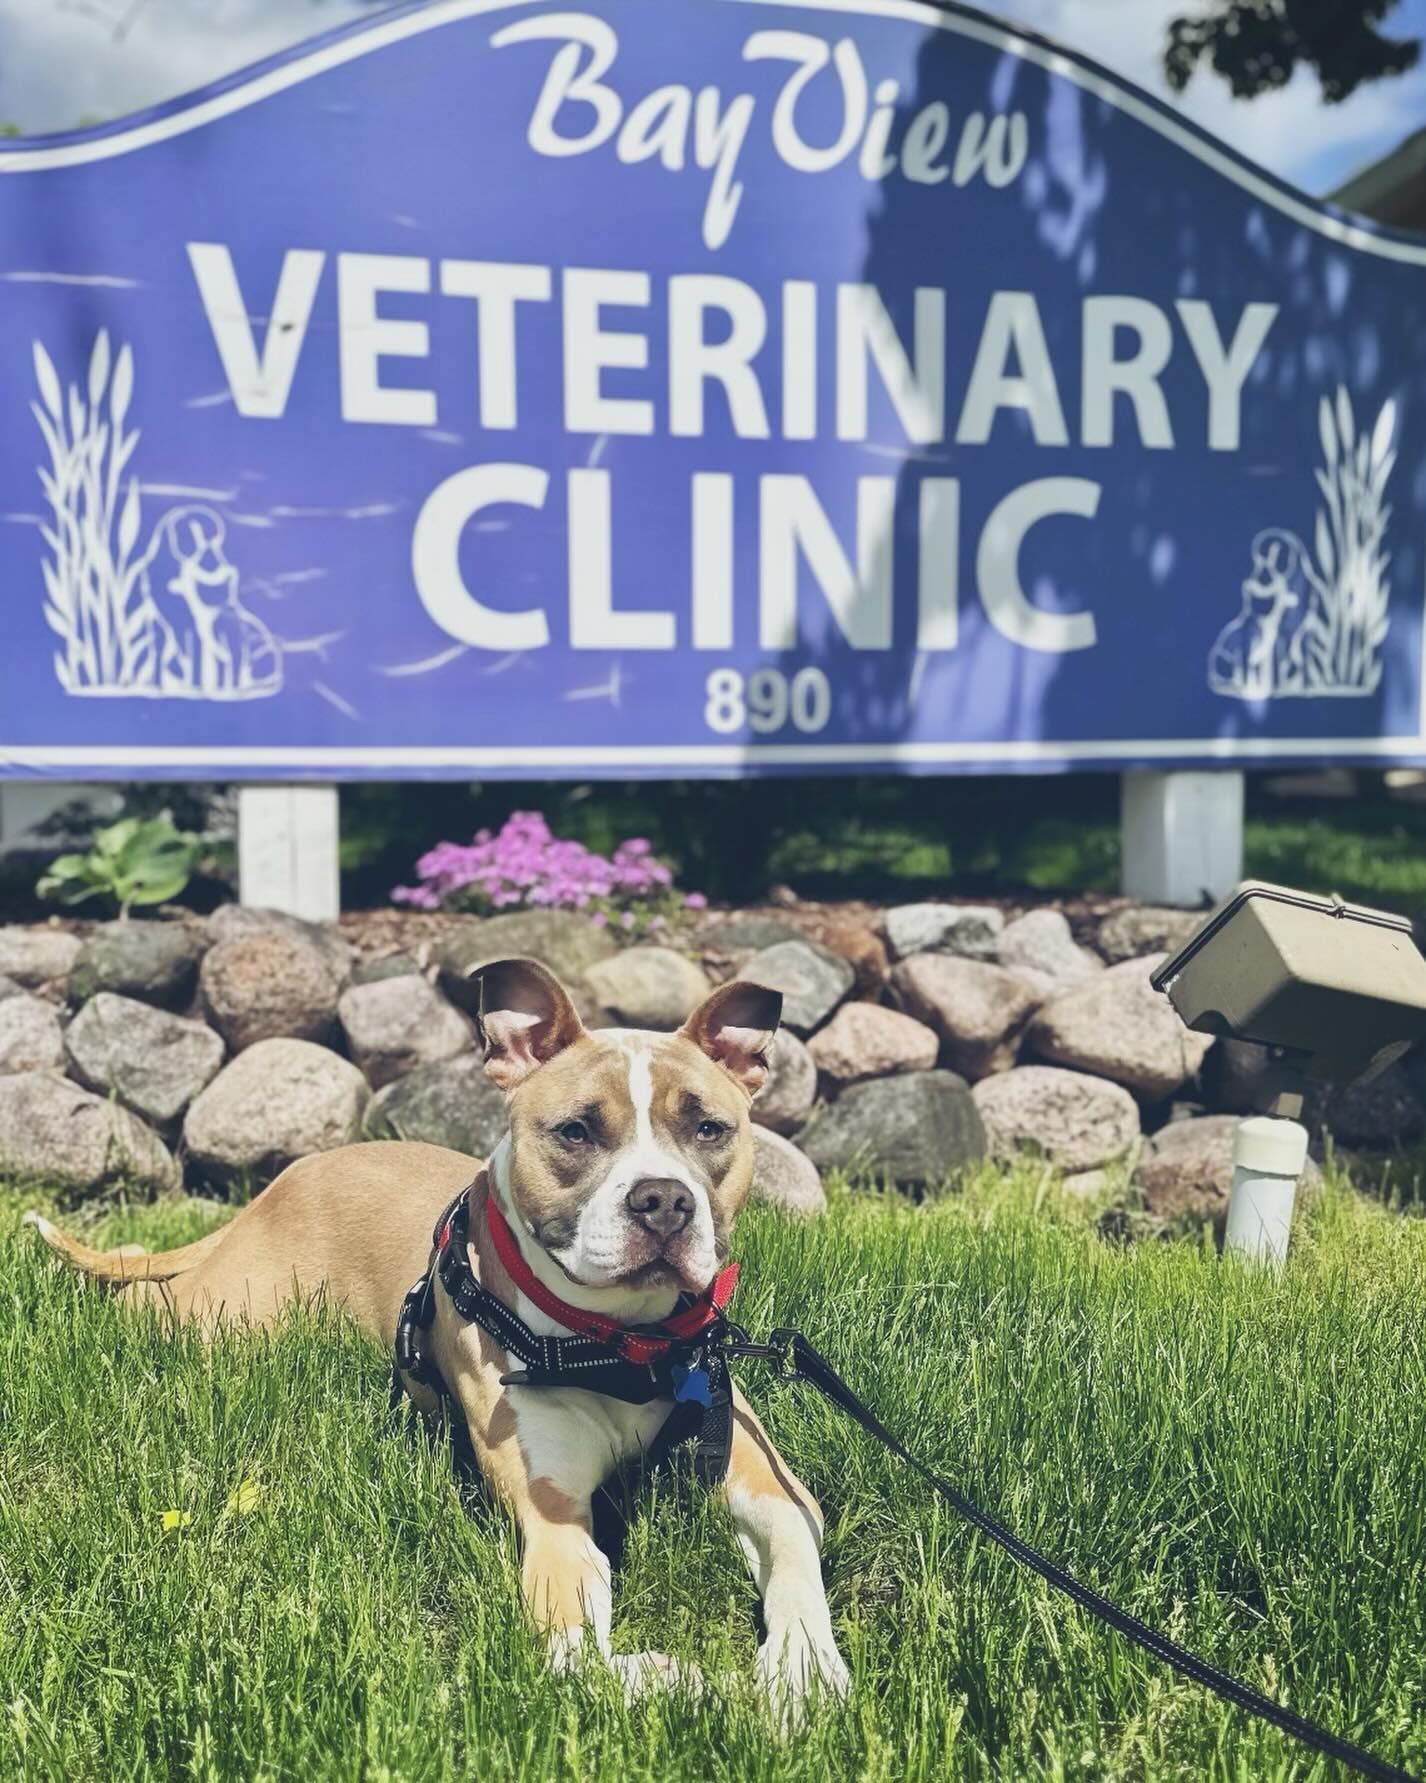 Handsome Toby visited our friends at Bay View Veterinary Clinic today for his first of a few checkups 🐾

He received the full Winston&rsquo;s Wishes medial treatment; full blood panel, vaccinations, and preventative care, and did so well! His next a